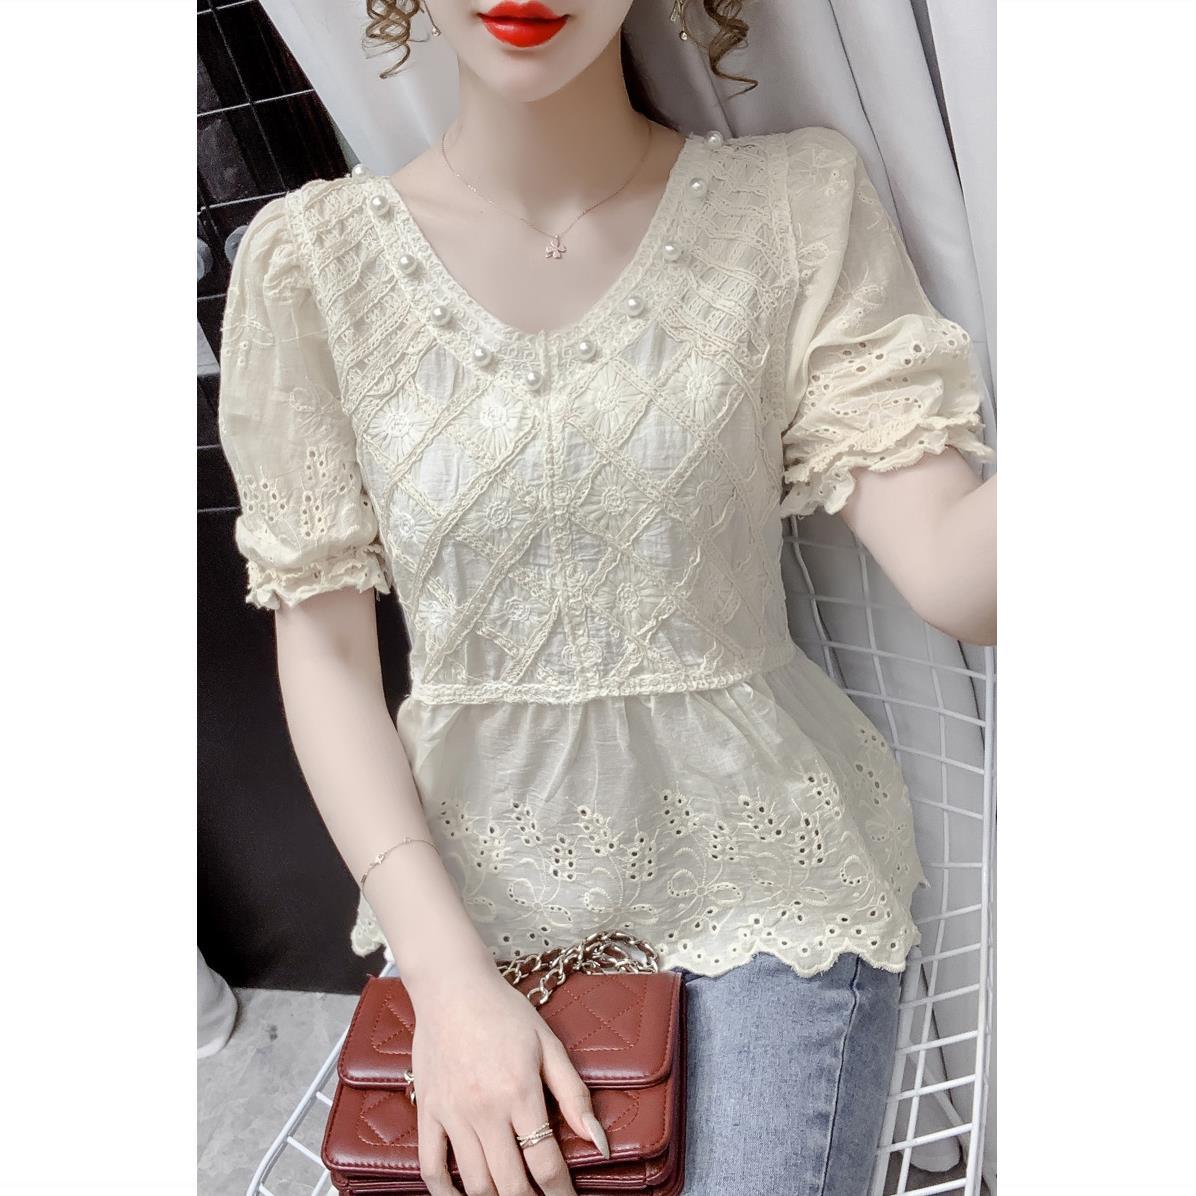 Shirt female 2021 summer new Korean version of the V-neck beaded hollow puff sleeve stitching design sense of niche tops casual